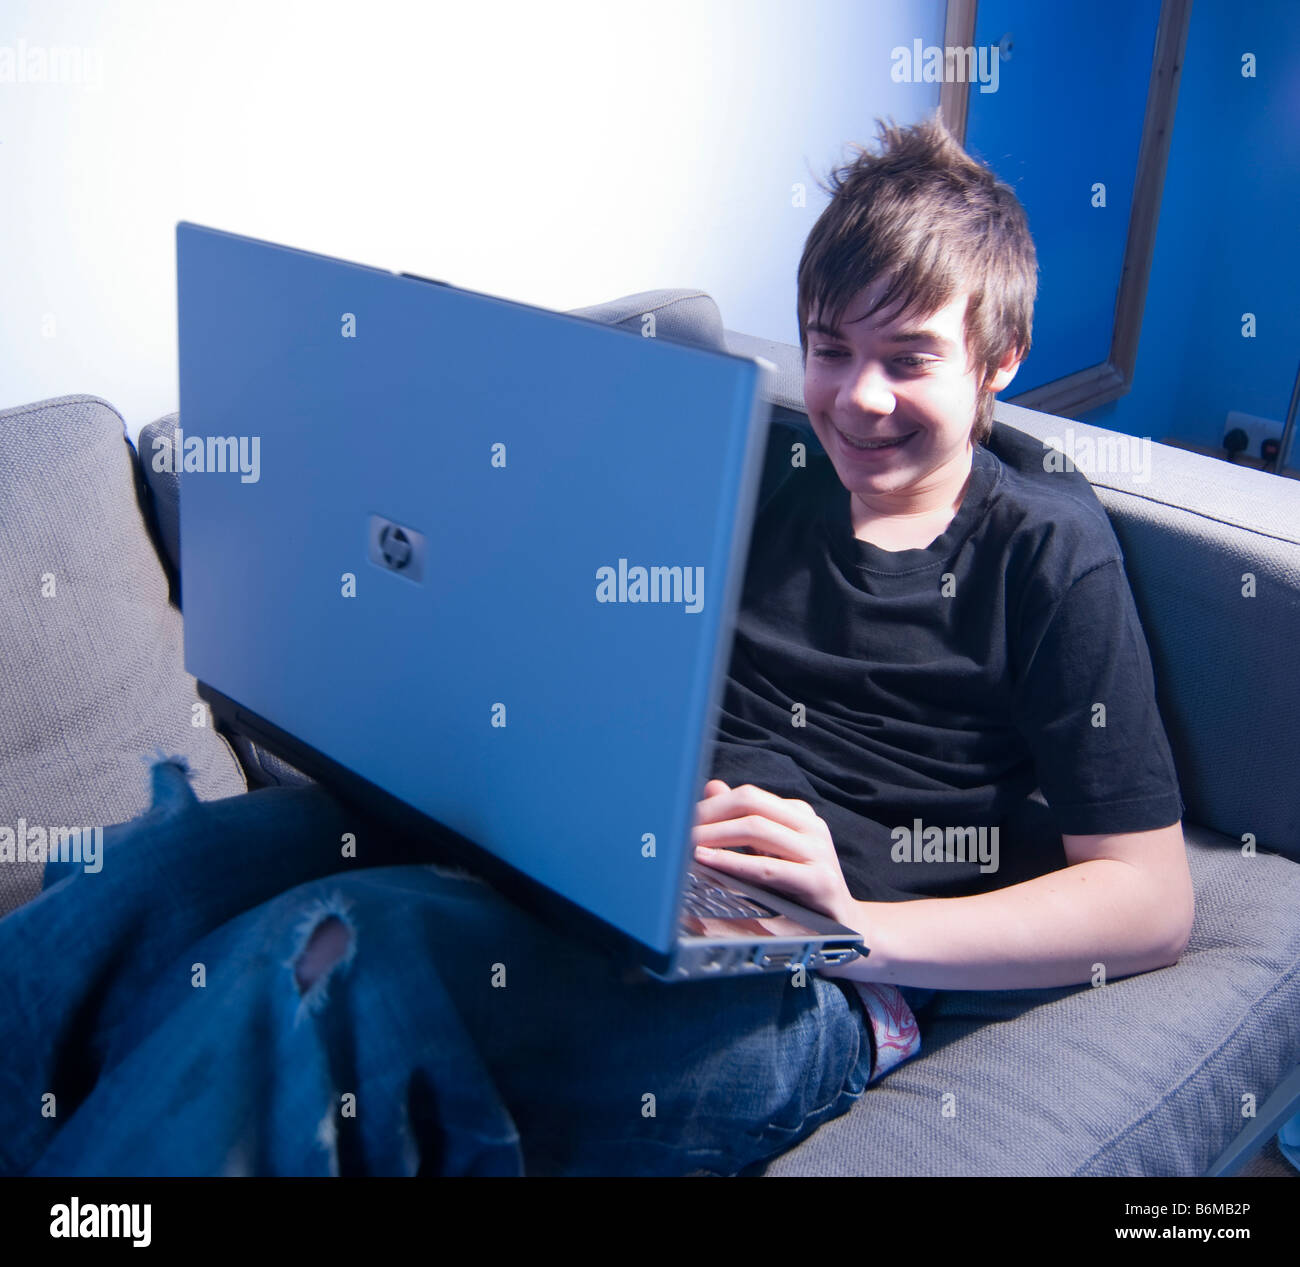 13-year-old-boy-teenager-with-laptop-computer-B6MB2P.jpg